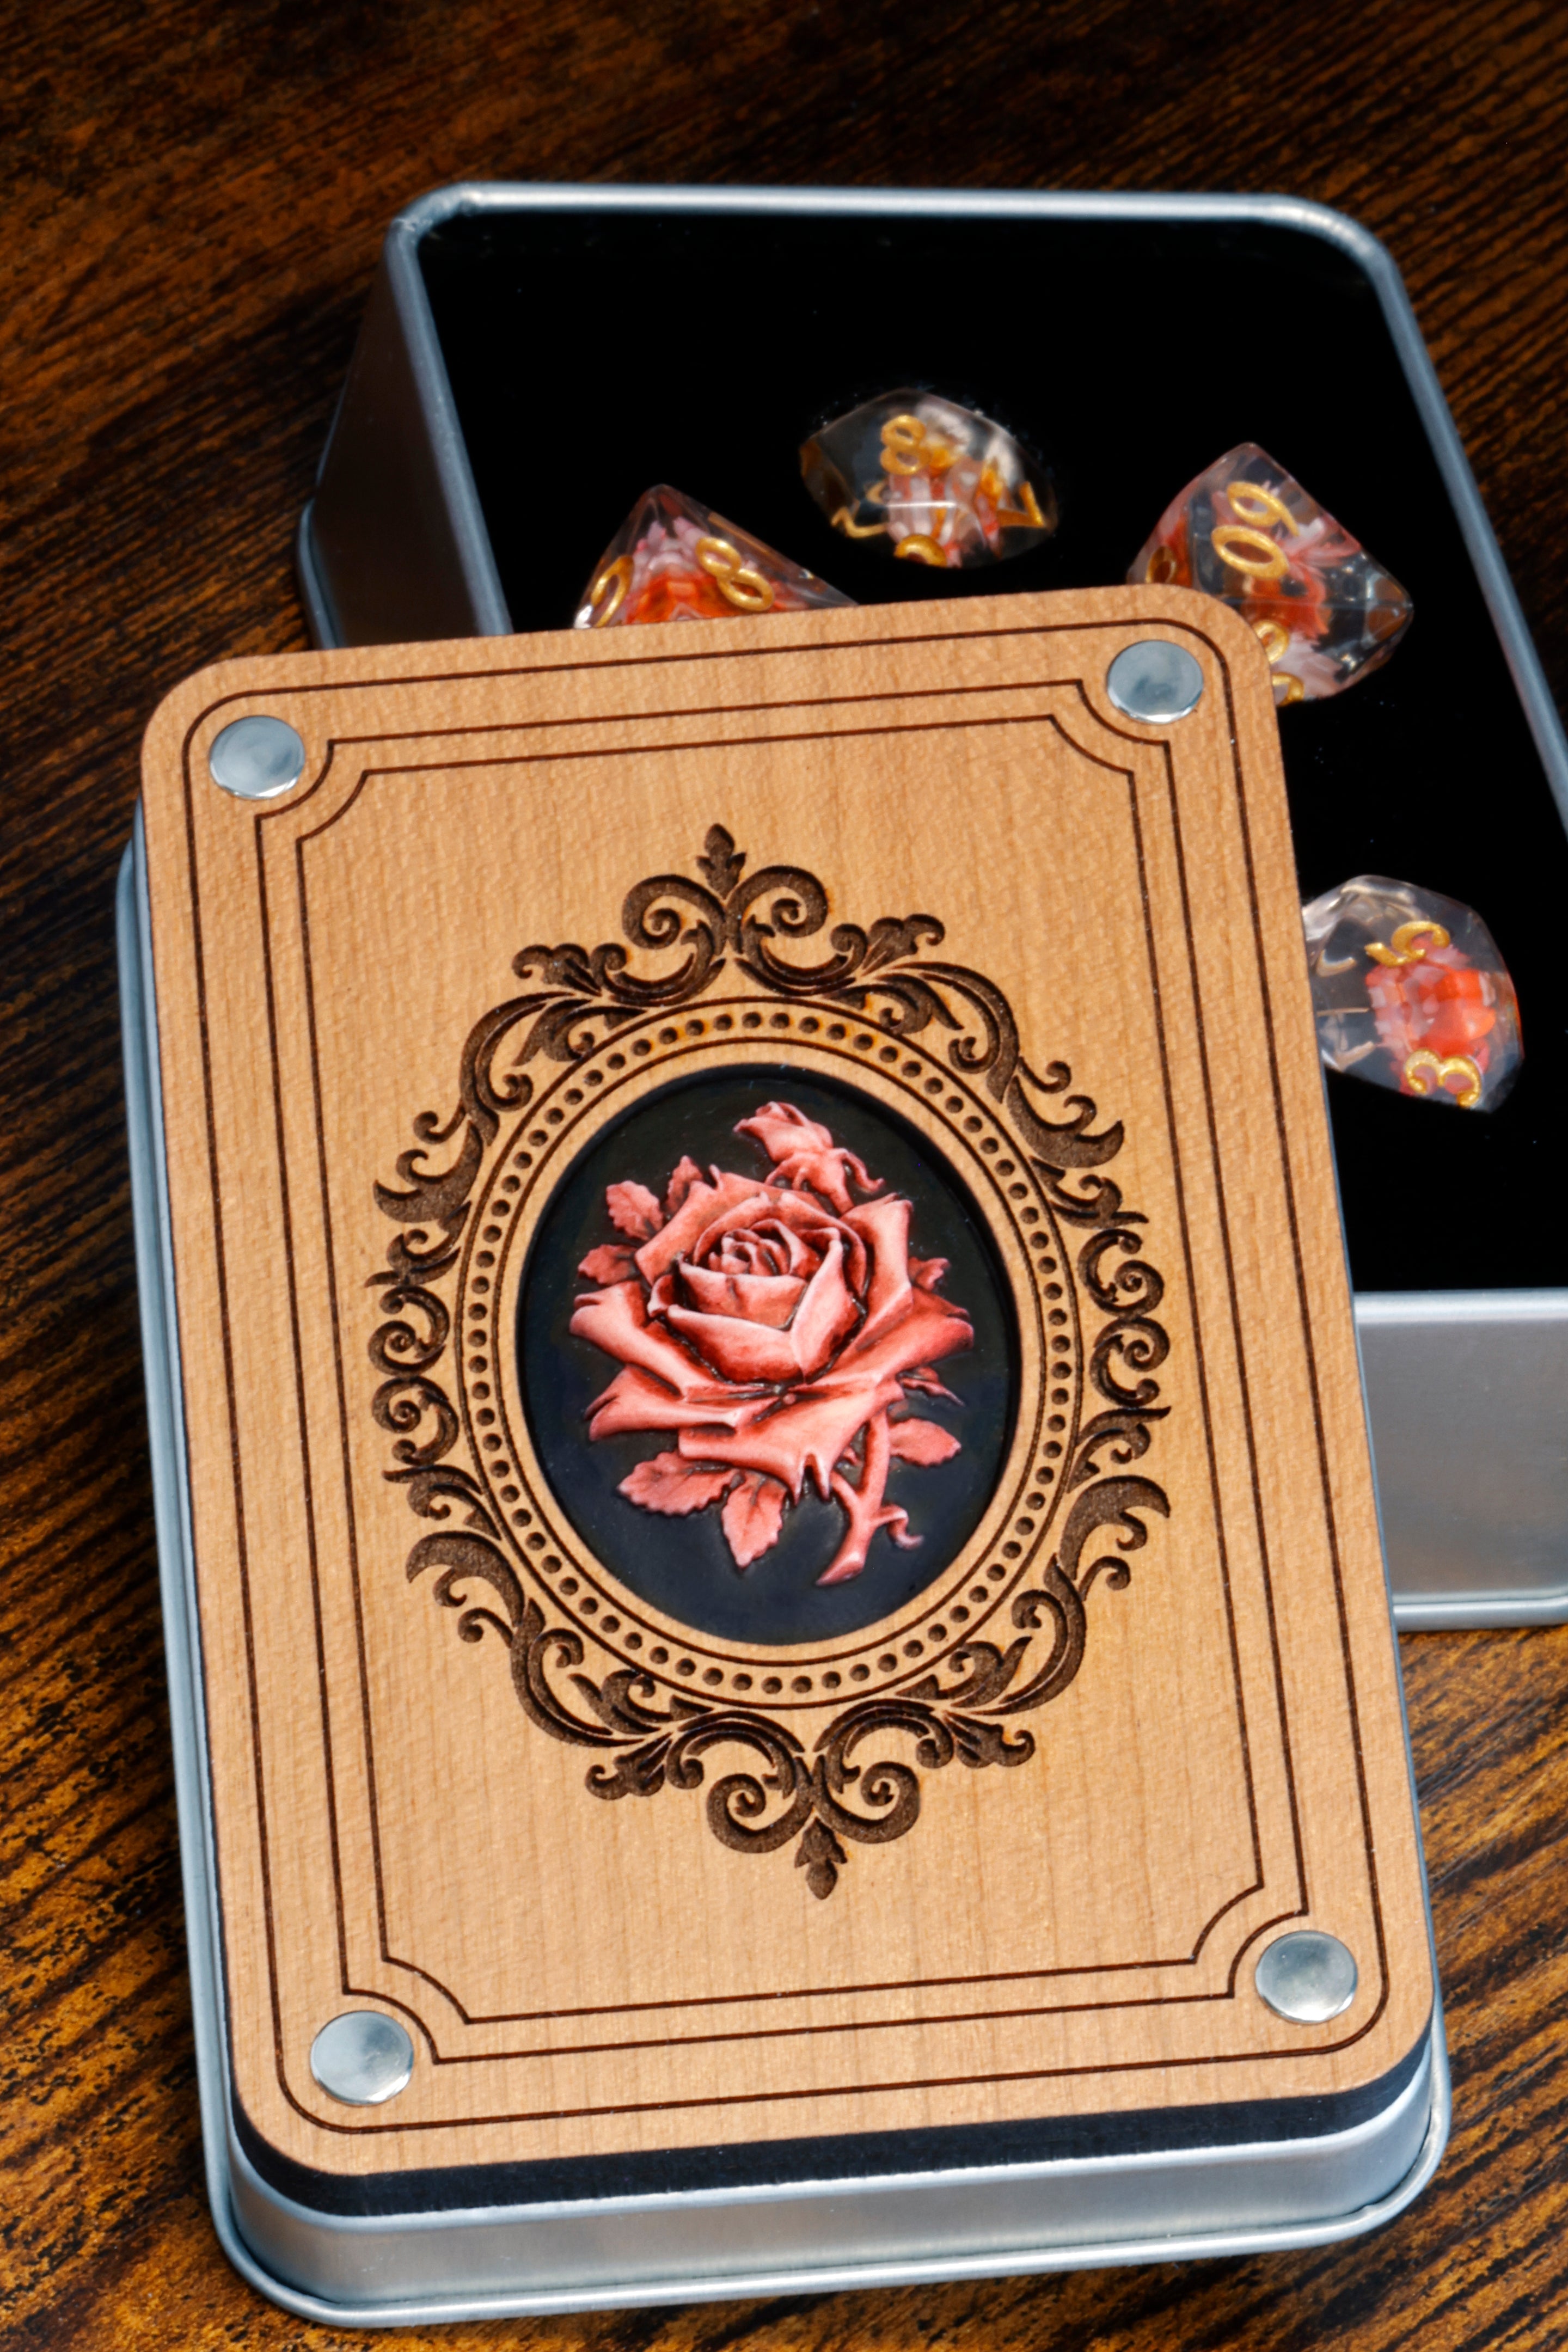 Red Rose dice box and dice wit pink and red flowers - The Wizard's Vault